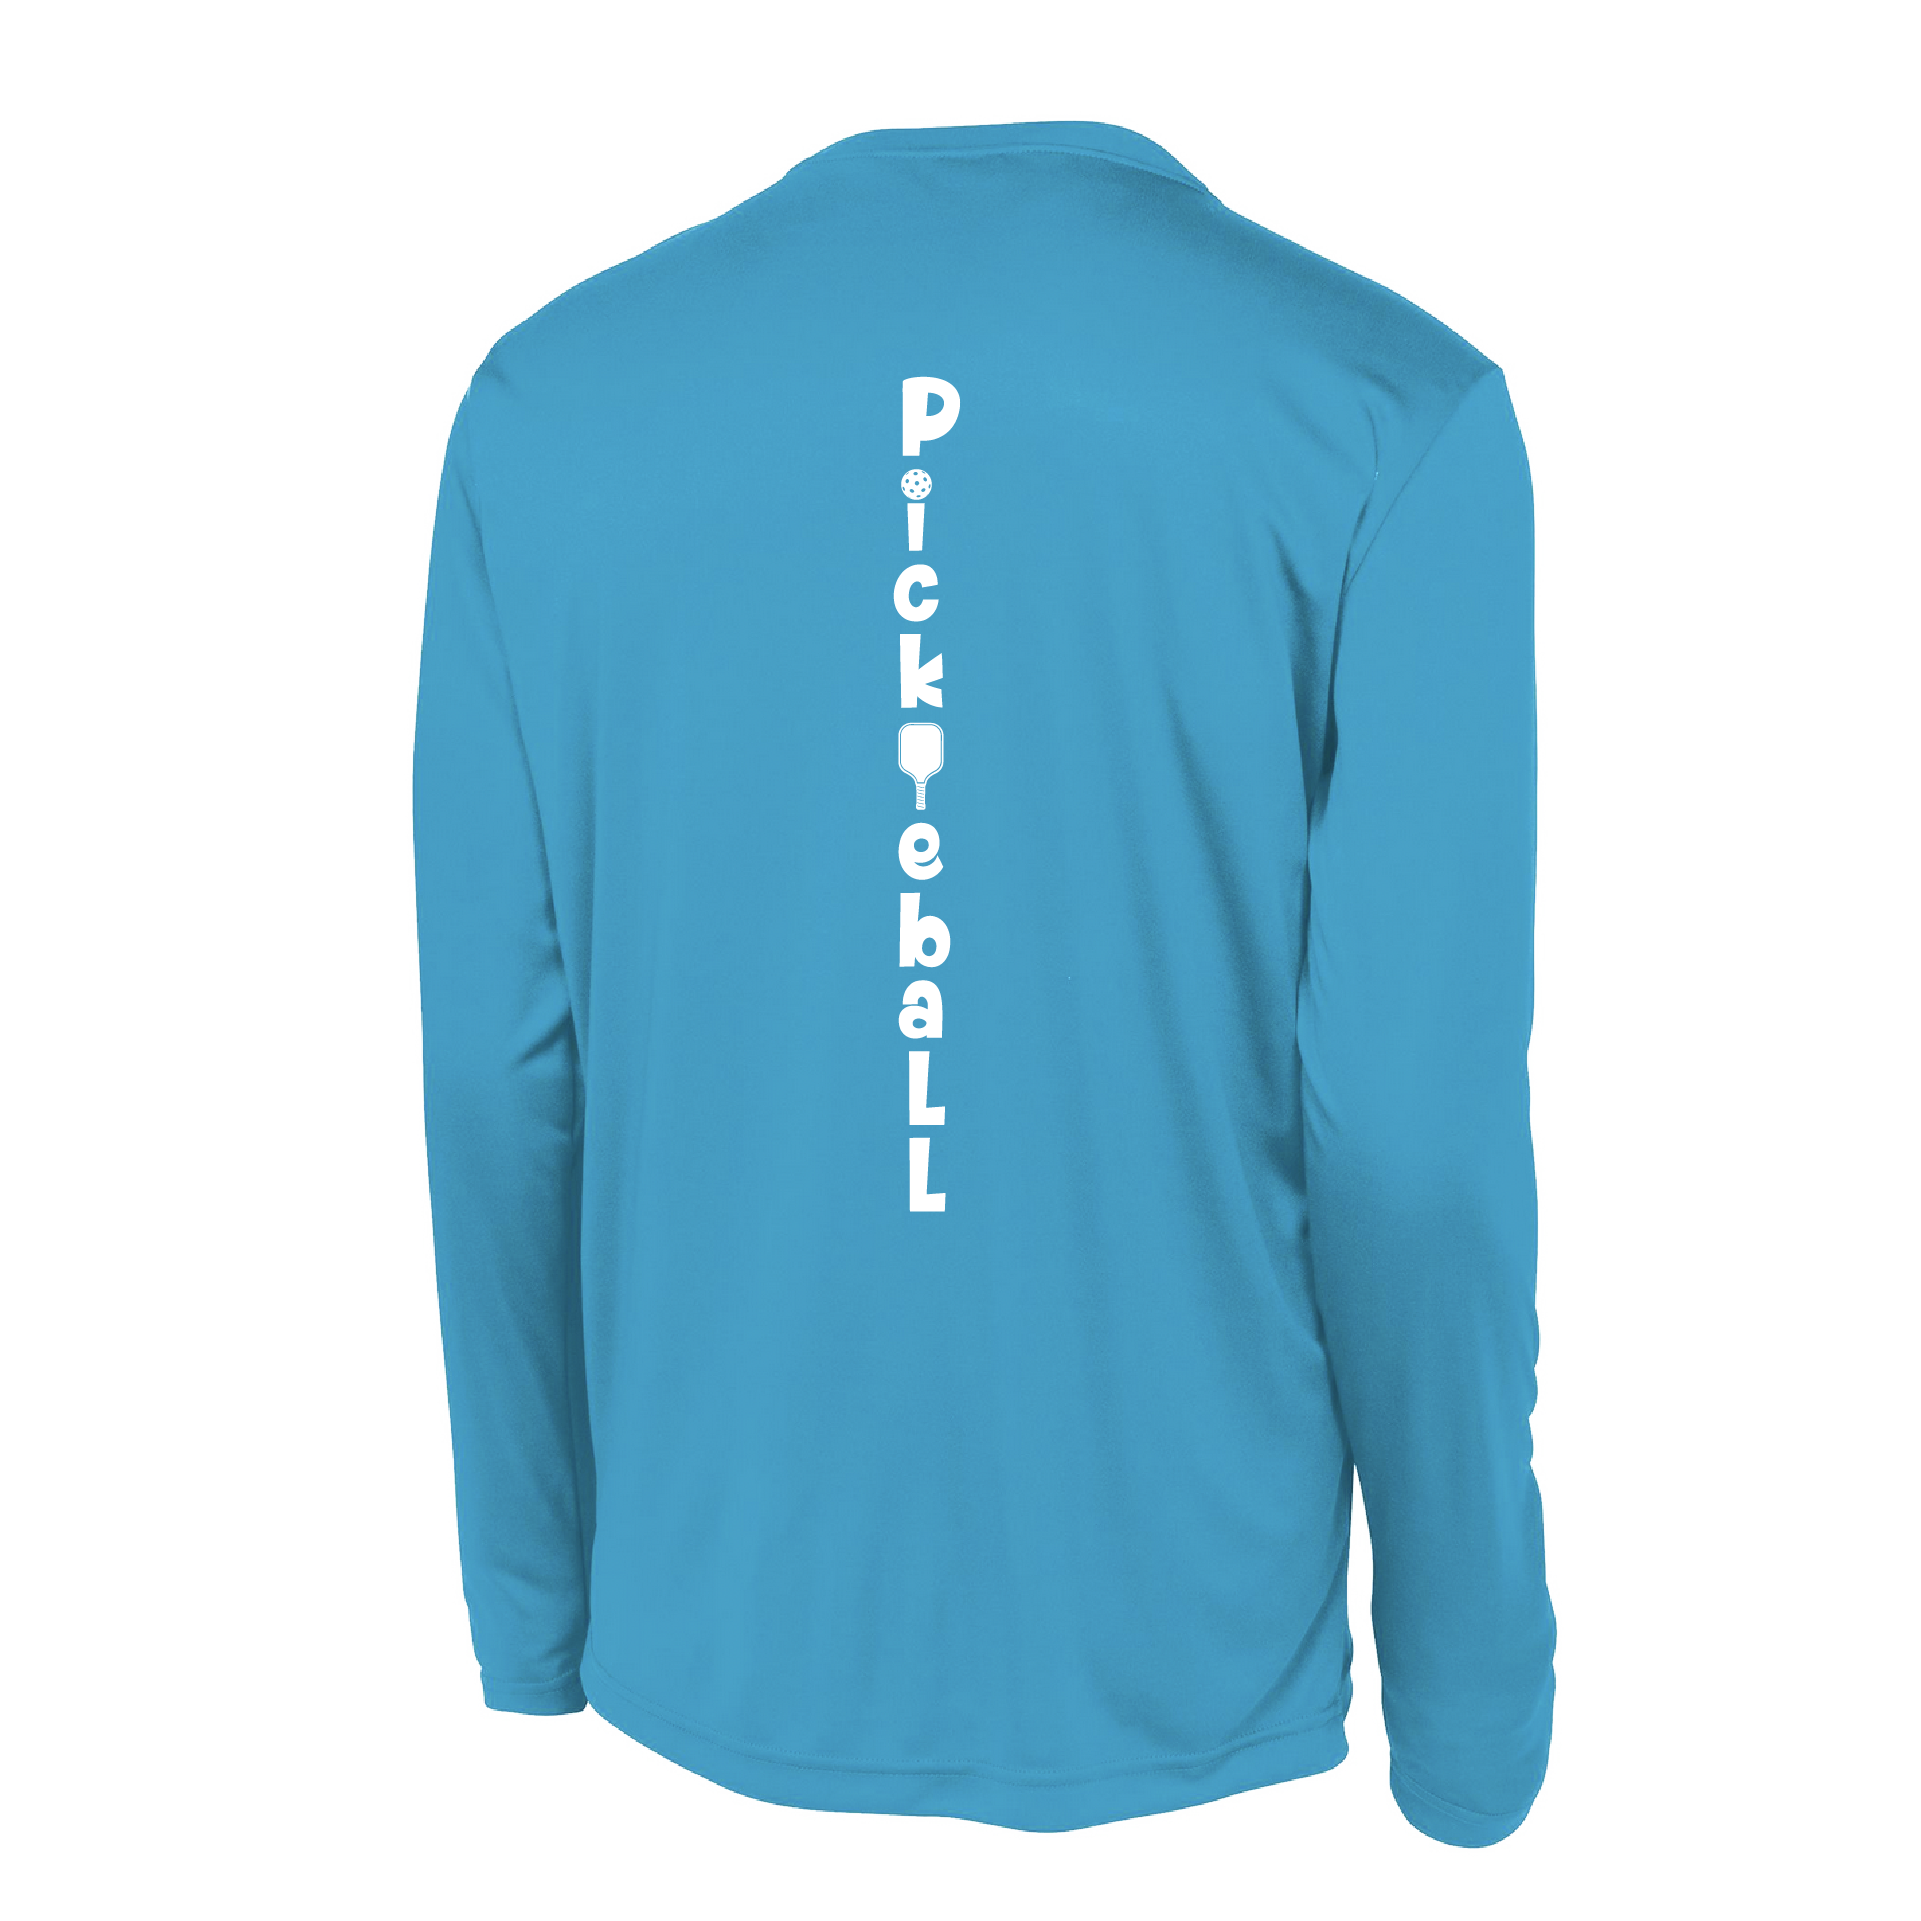 Pickleball Design: Pickleball Vertical Customizable Location  Men's Style: Long Sleeve (LS)  Shirts are lightweight, roomy and highly breathable. These moisture-wicking shirts are designed for athletic performance. They feature PosiCharge technology to lock in color and prevent logos from fading. Removable tag and set-in sleeves for comfort.